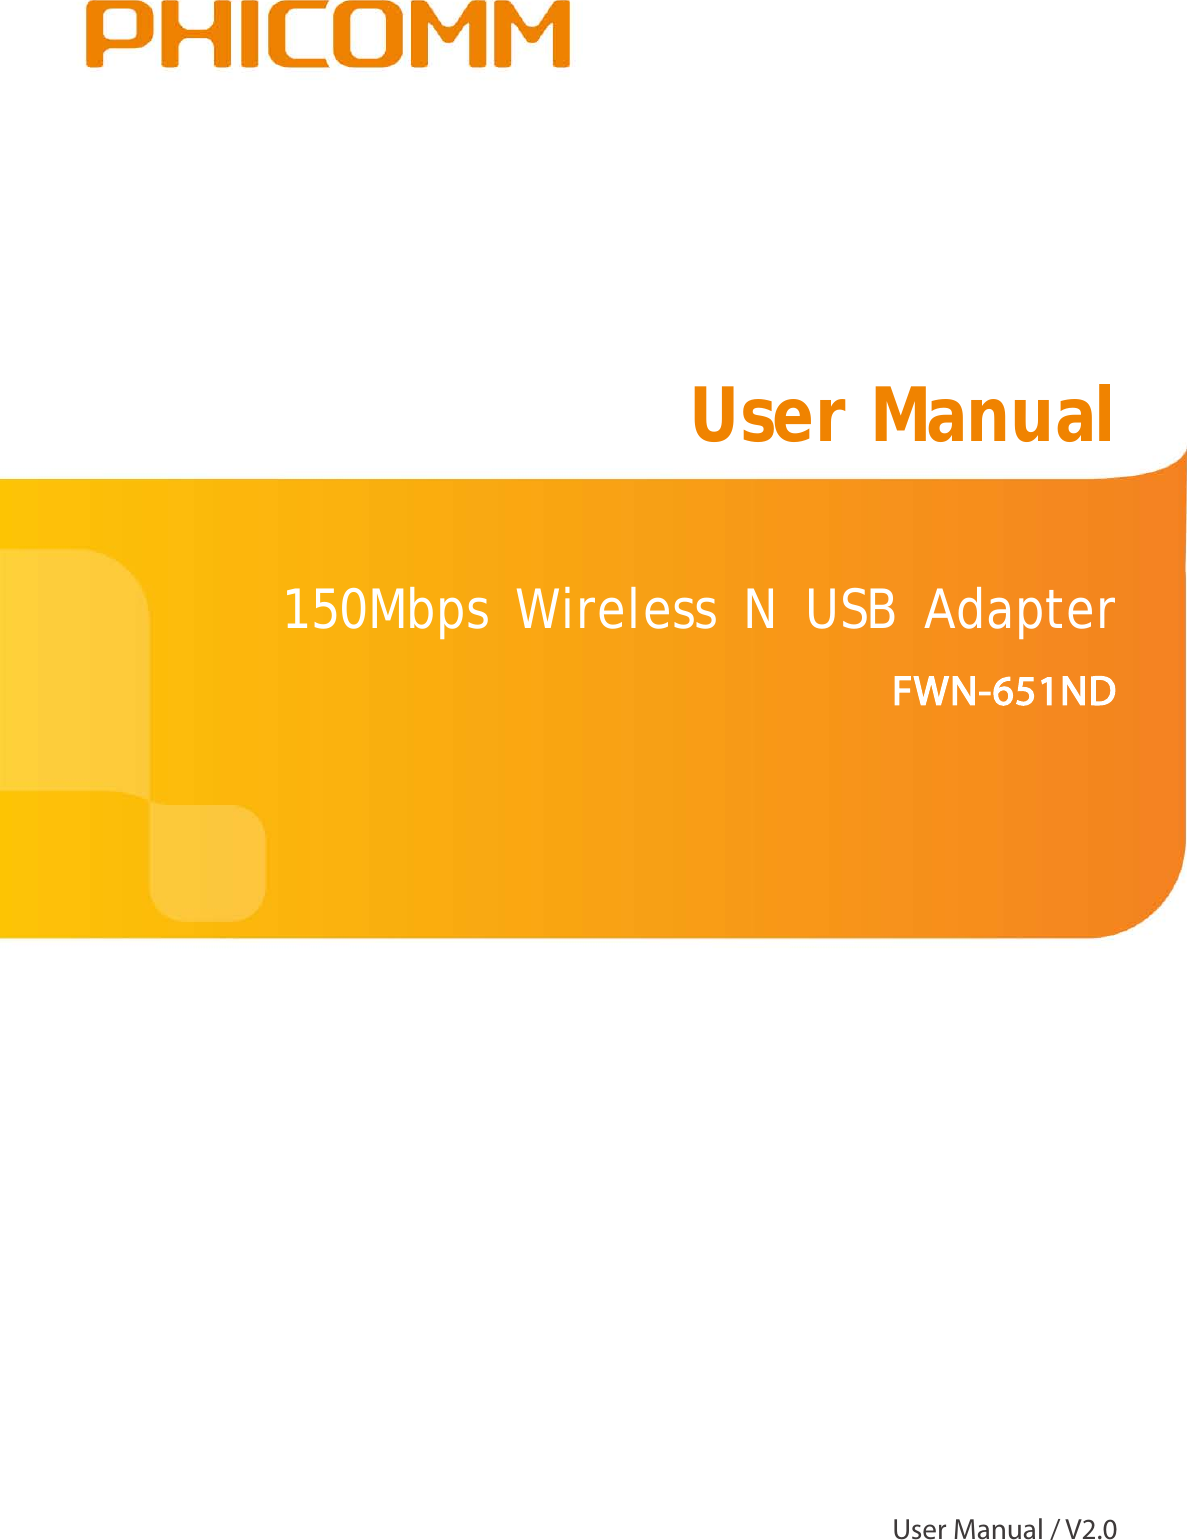                                                            150Mbps Wireless N USB Adapter    FWN-651ND  User Manual  User Manual / V2.0 